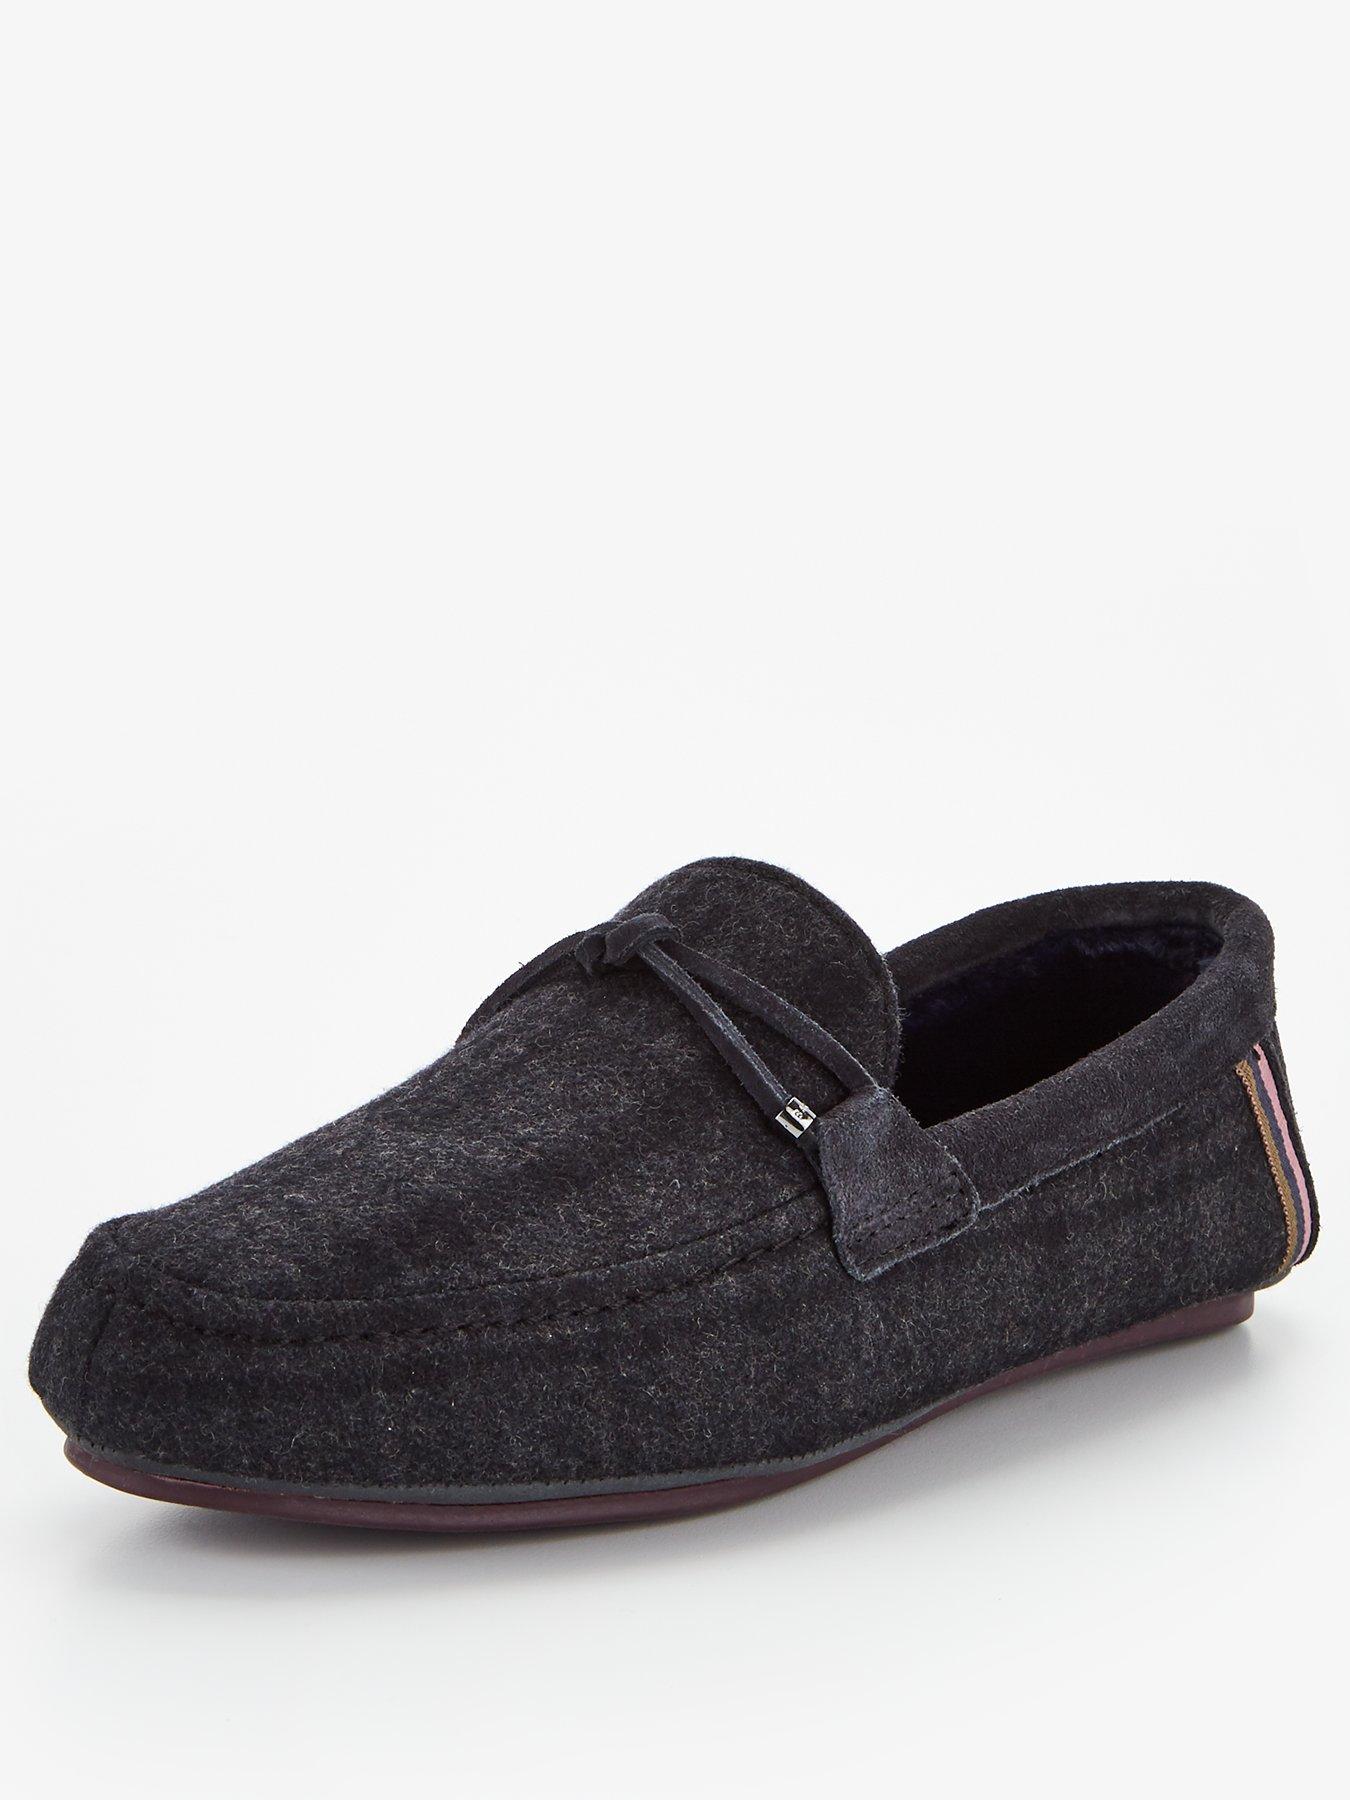 ted baker mens moccasin slippers